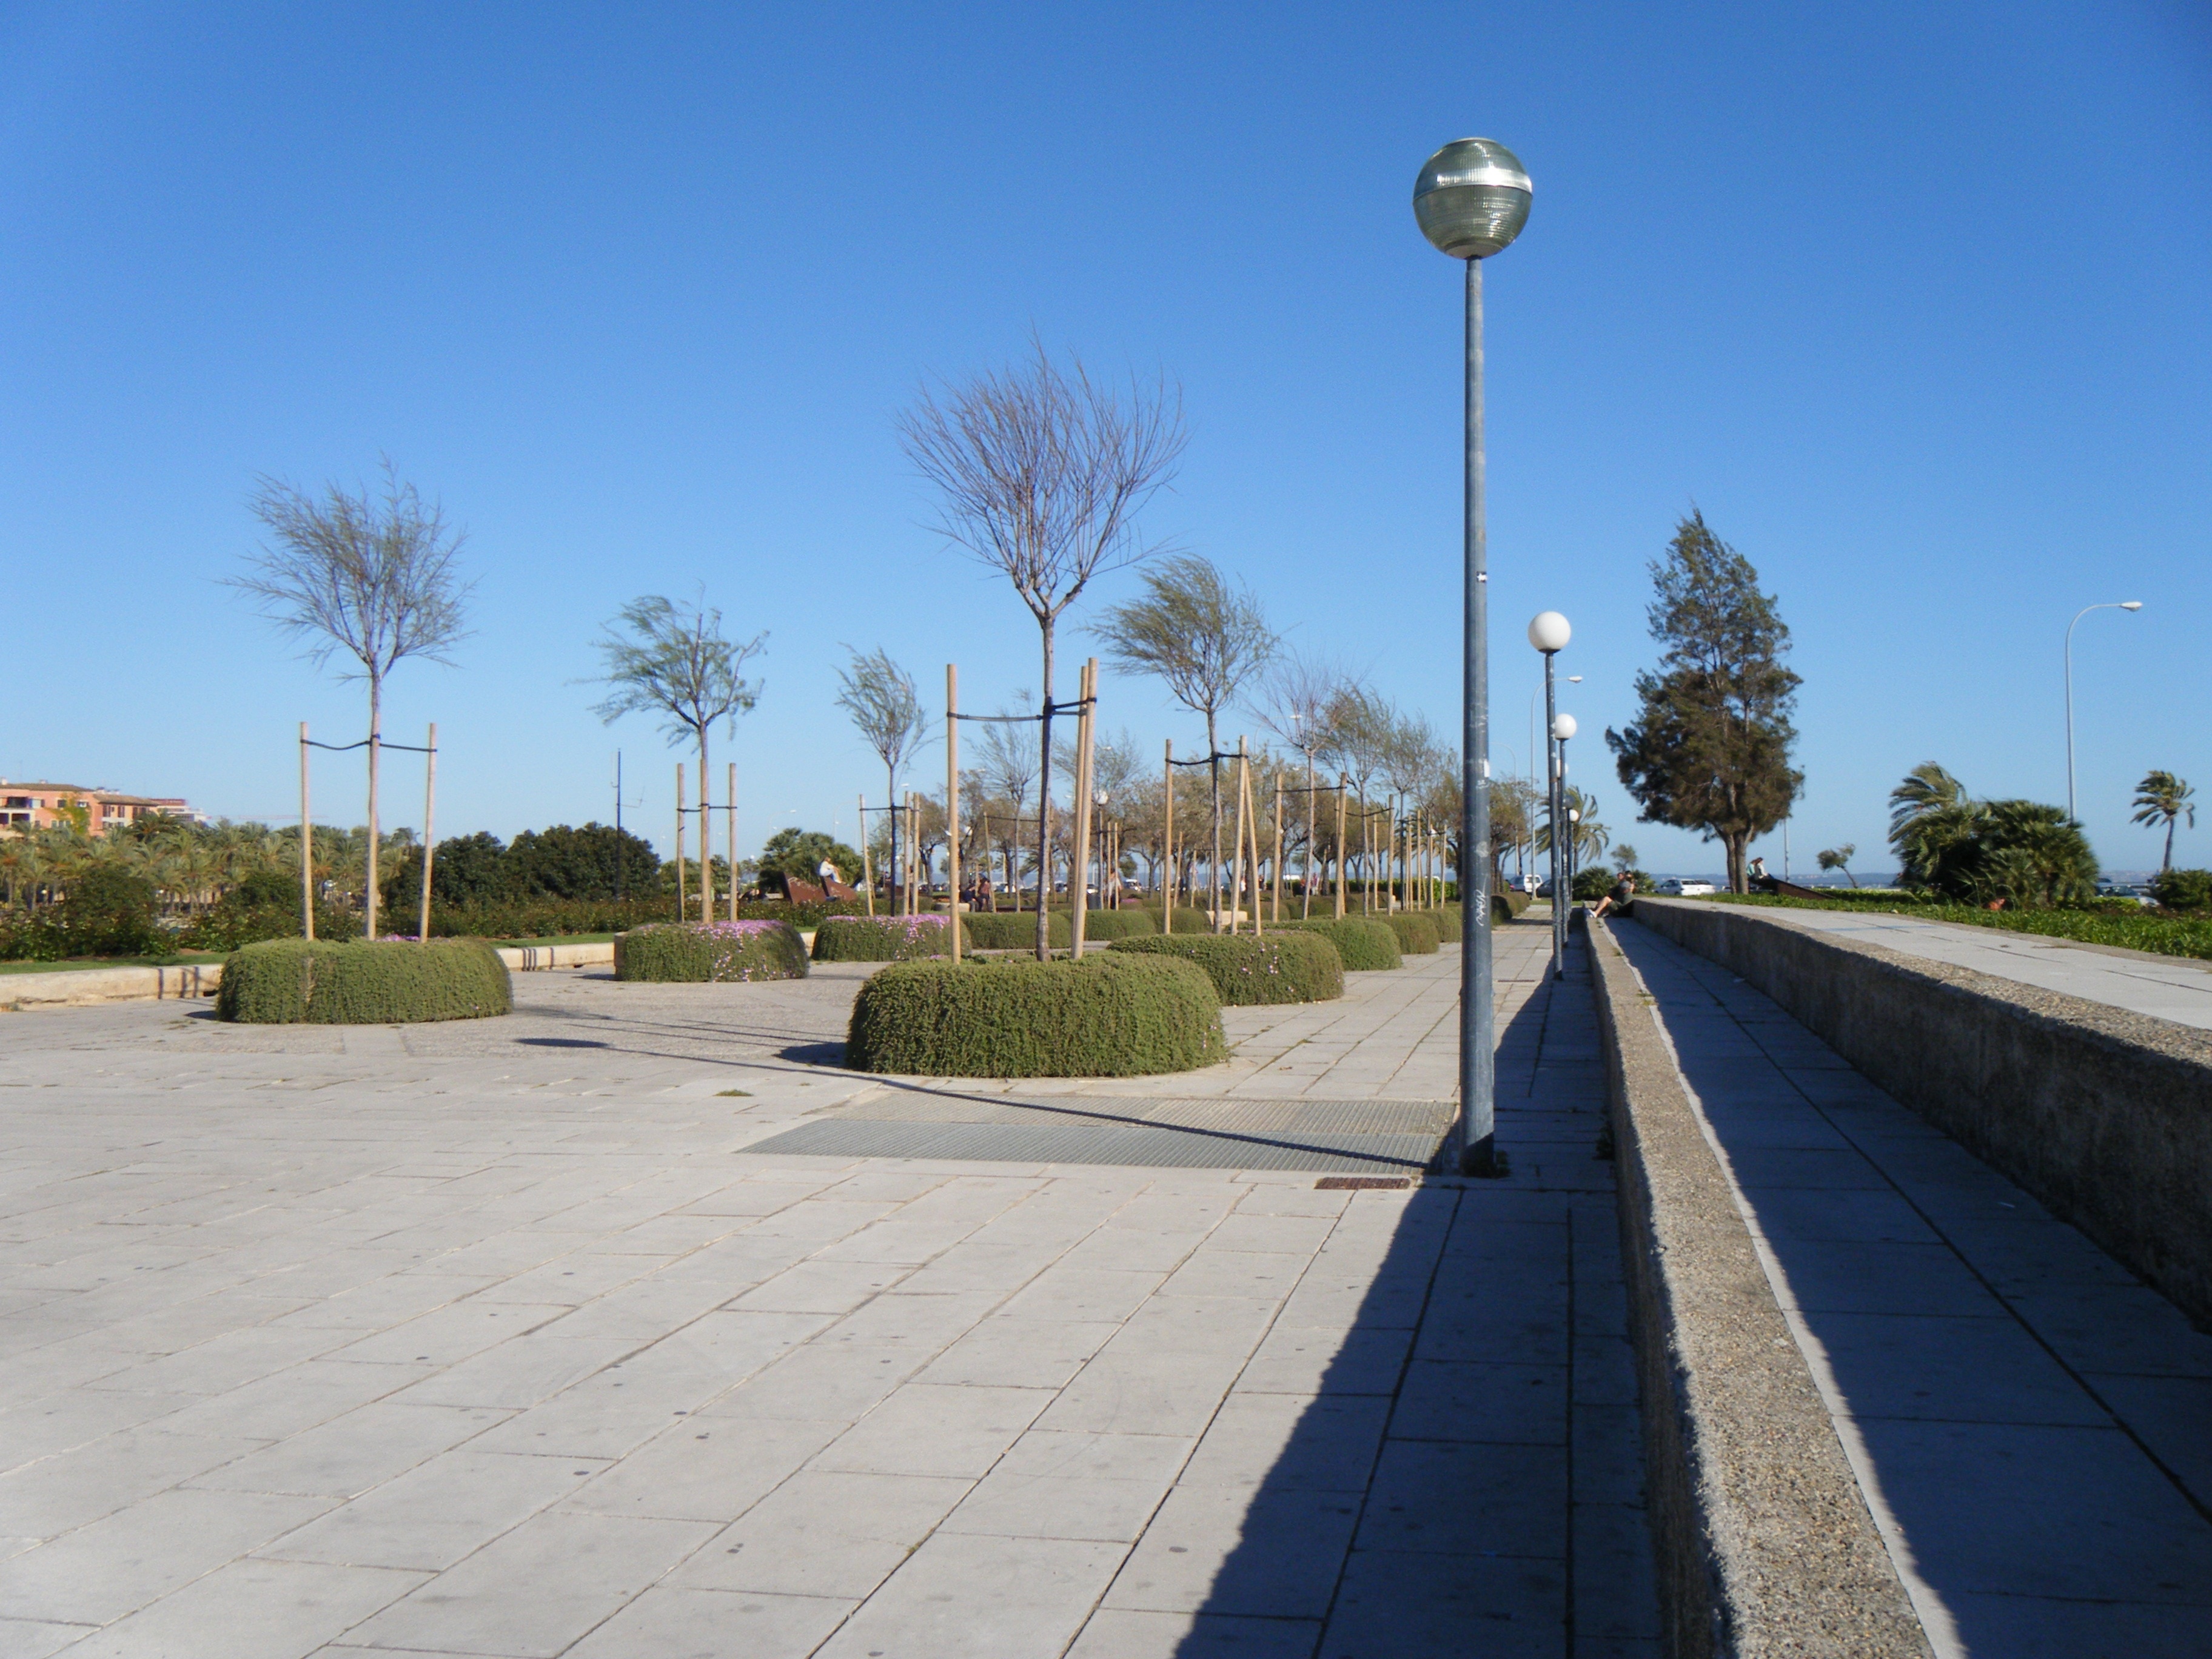 park with street lamps